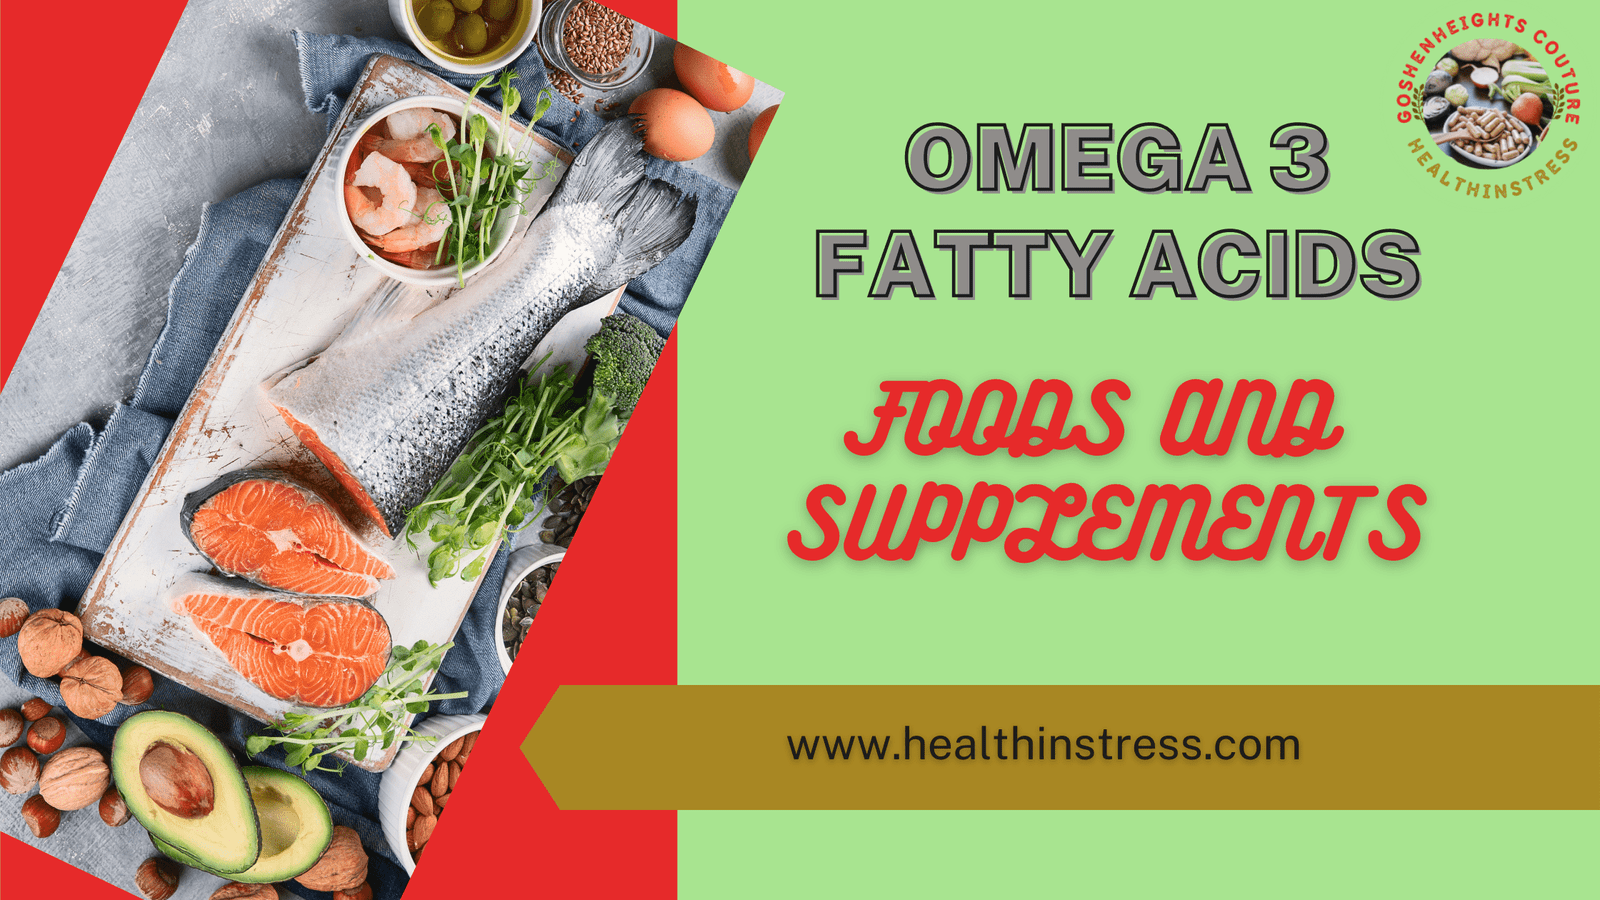 You are currently viewing OMEGA 3 FATTY ACIDS